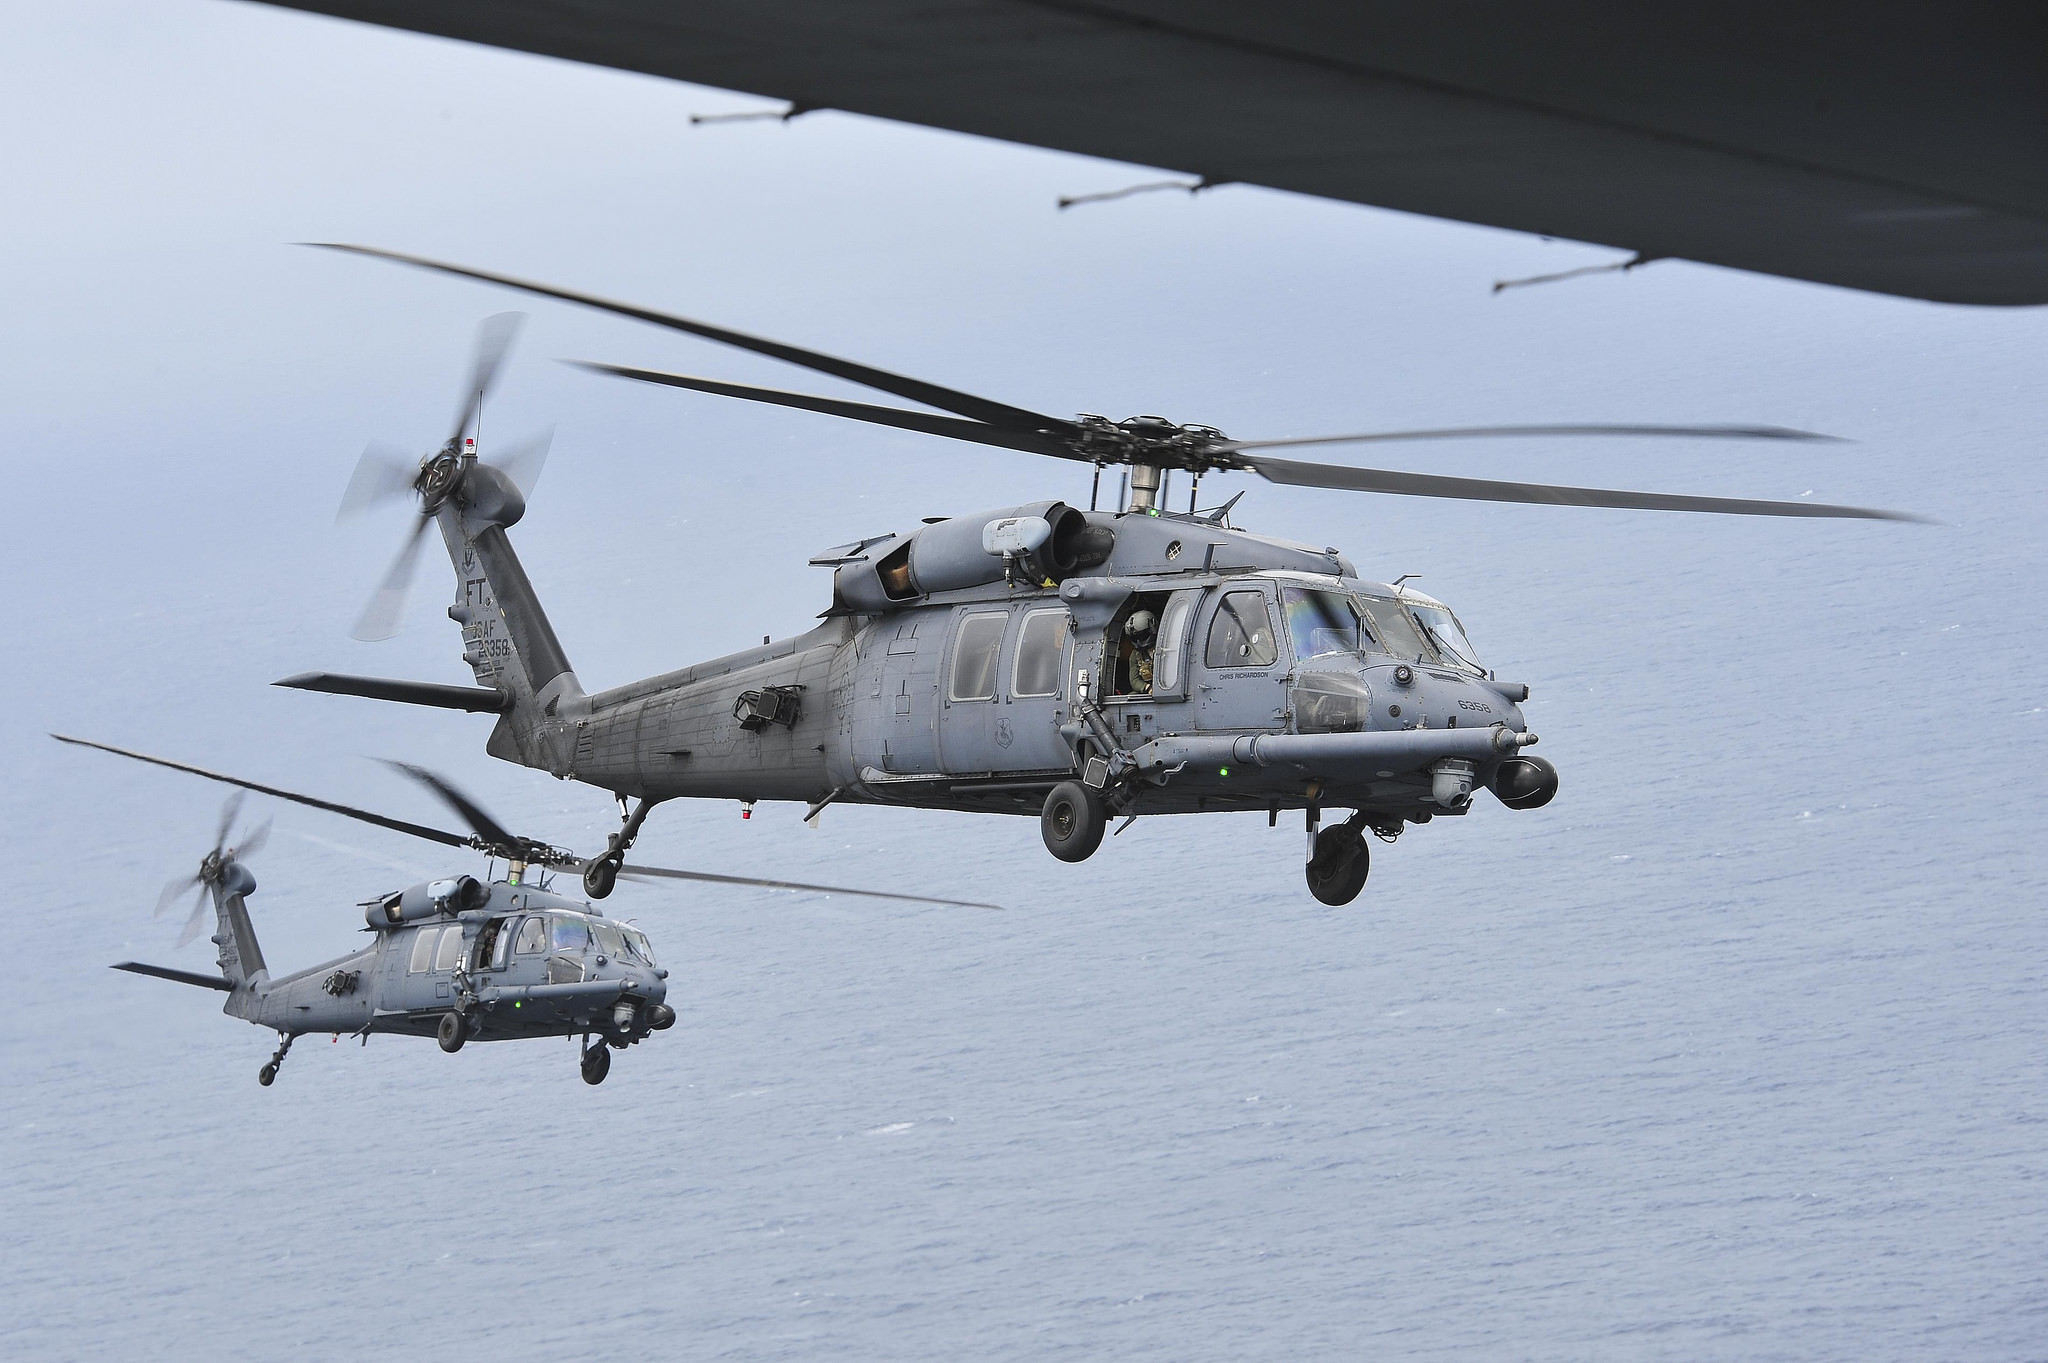 Aircraft Helicopter Sikorsky Hh 60 Pave Hawk 2048x1363